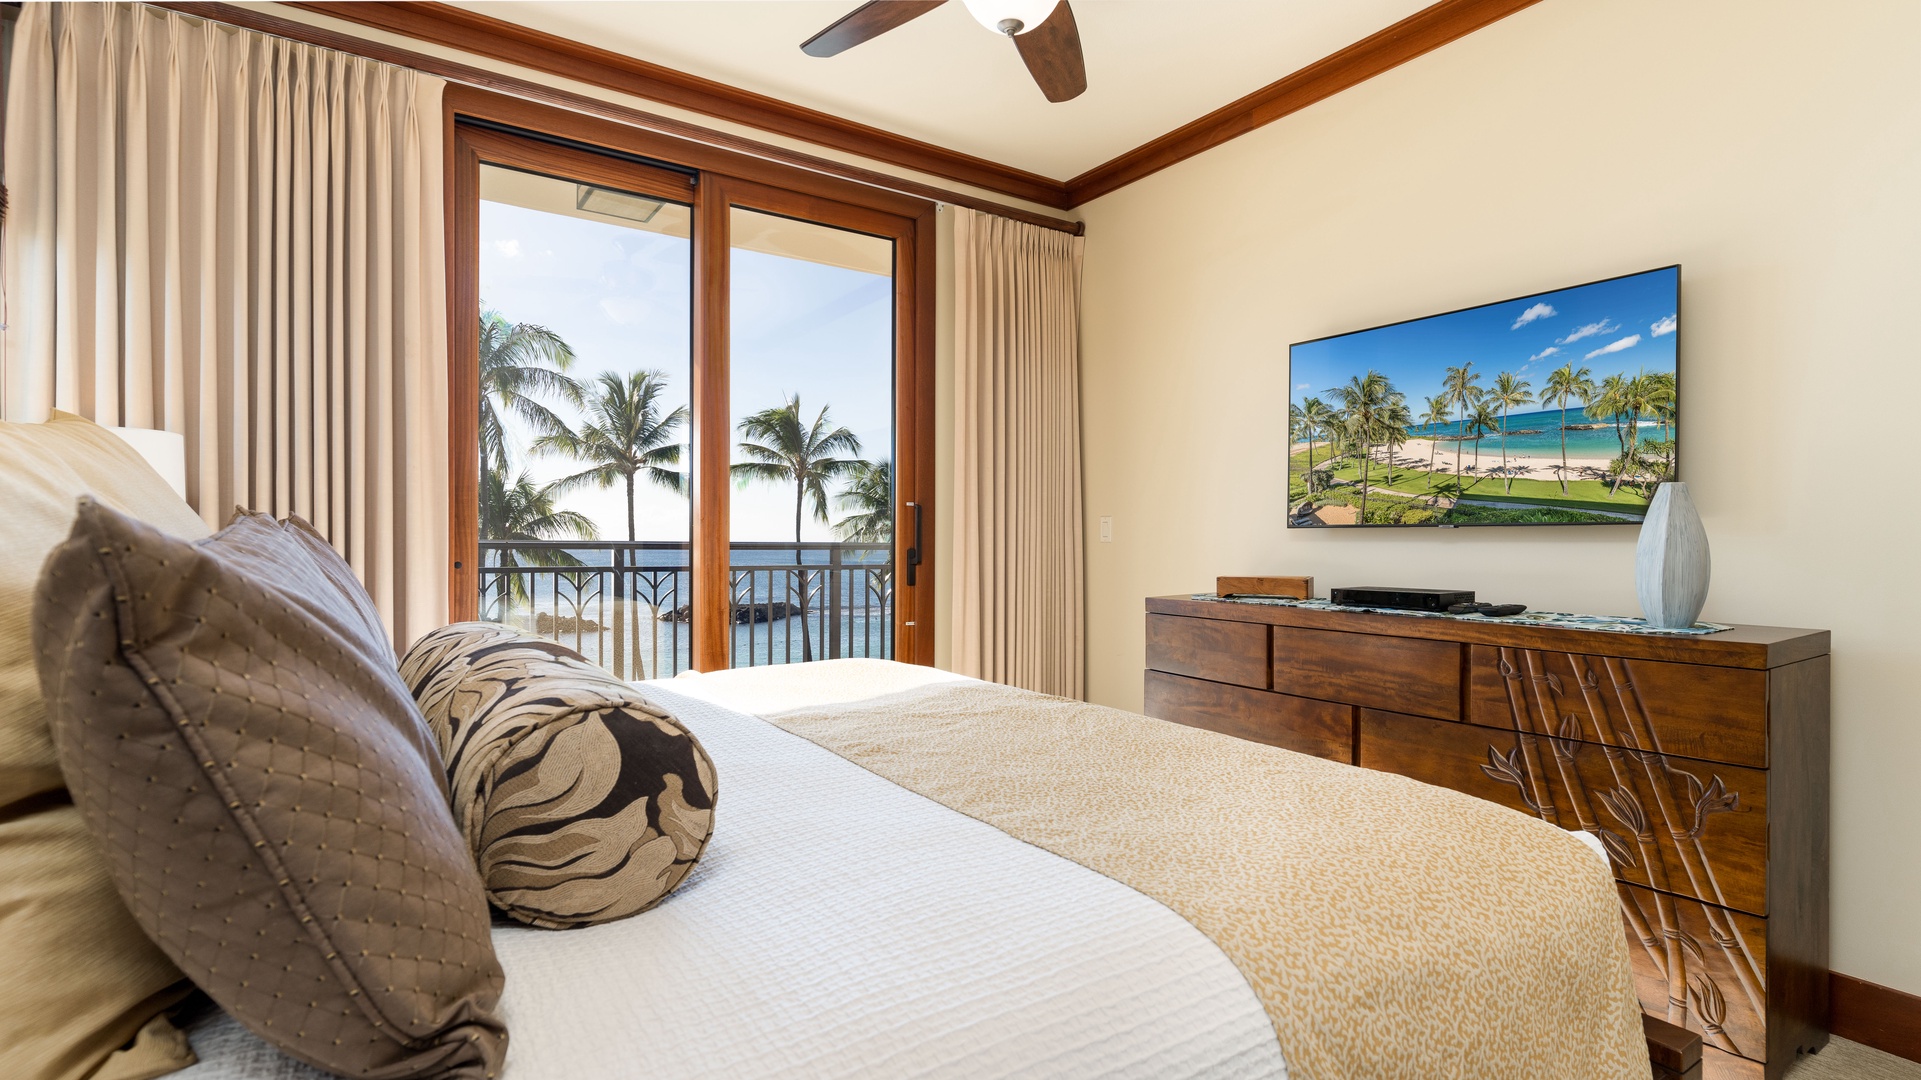 Kapolei Vacation Rentals, Ko Olina Beach Villas B309 - The primary guest bedroom with TV and the best views.